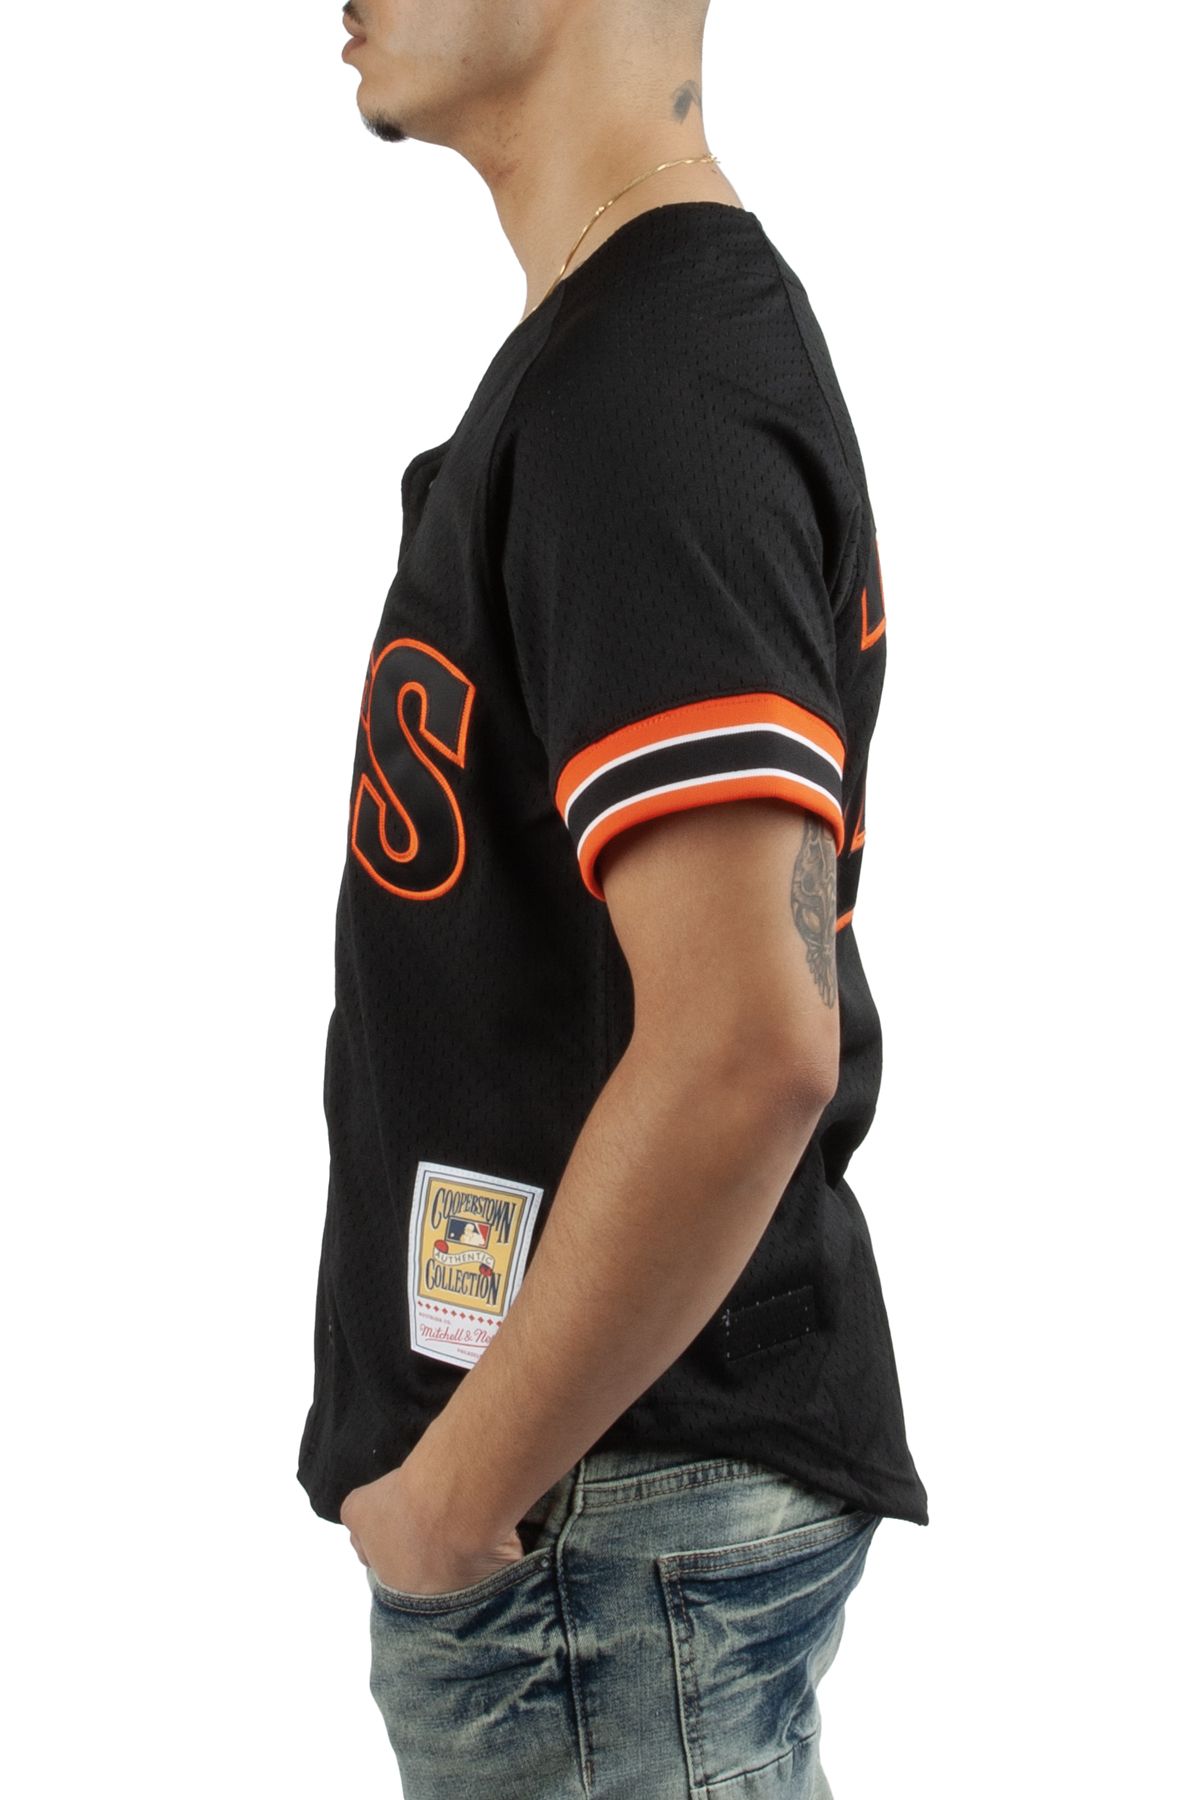 san francisco giants mitchell and ness jersey